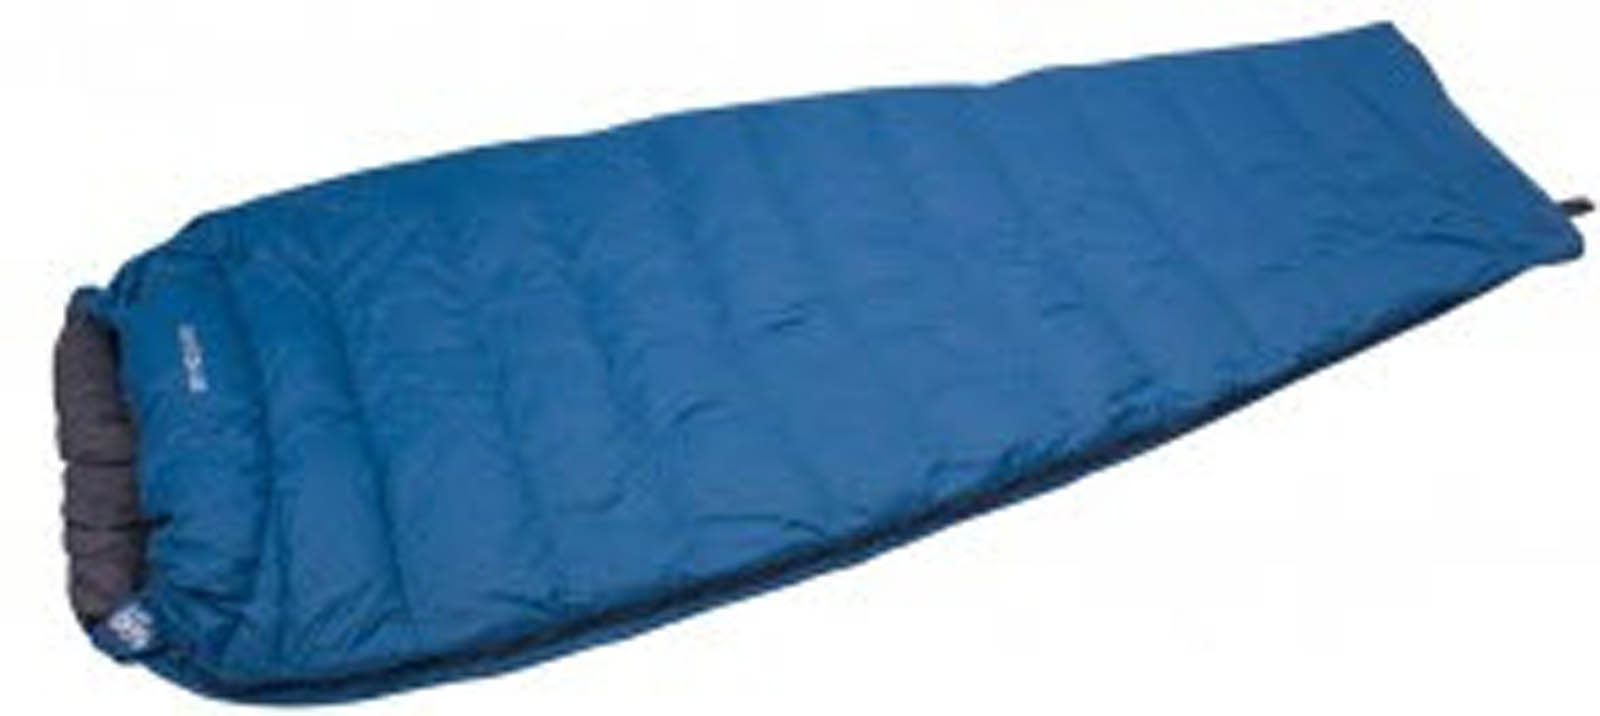 , Sleeping Bags – Synthetic or Down?